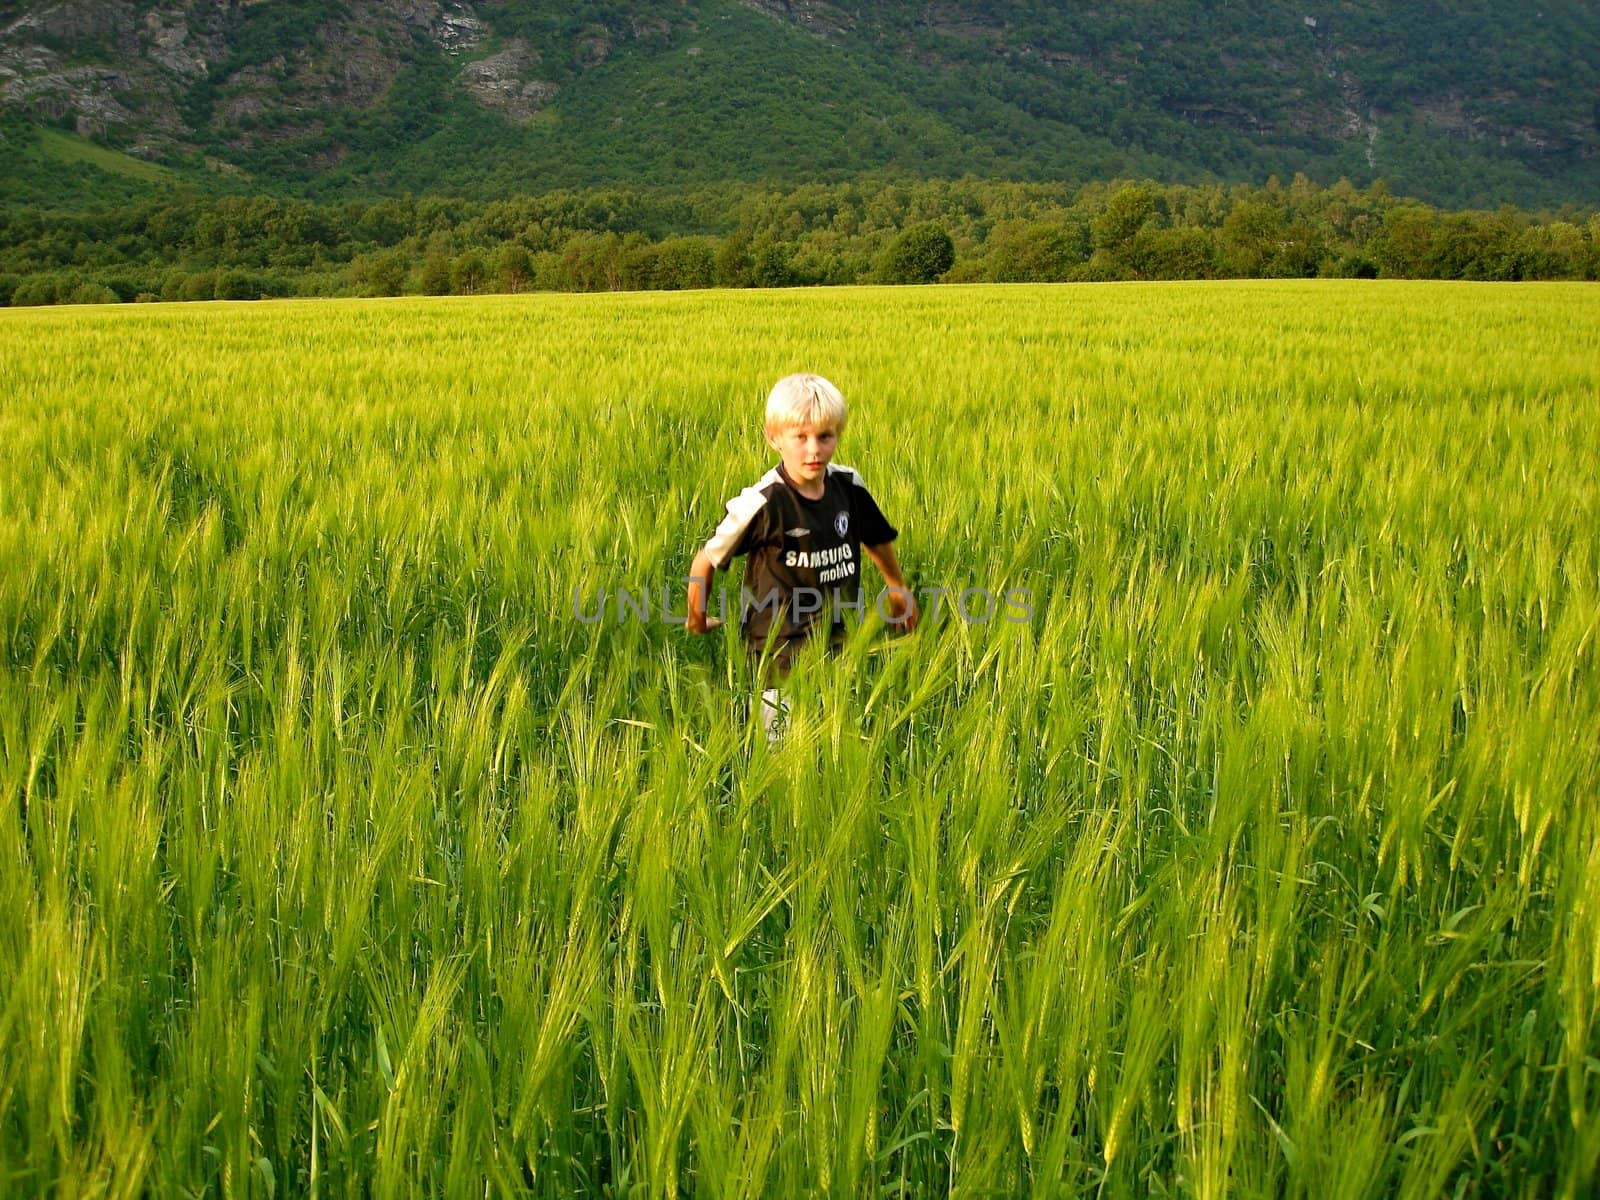 boy playing in the wheat field. Please note: No negative use allowed.